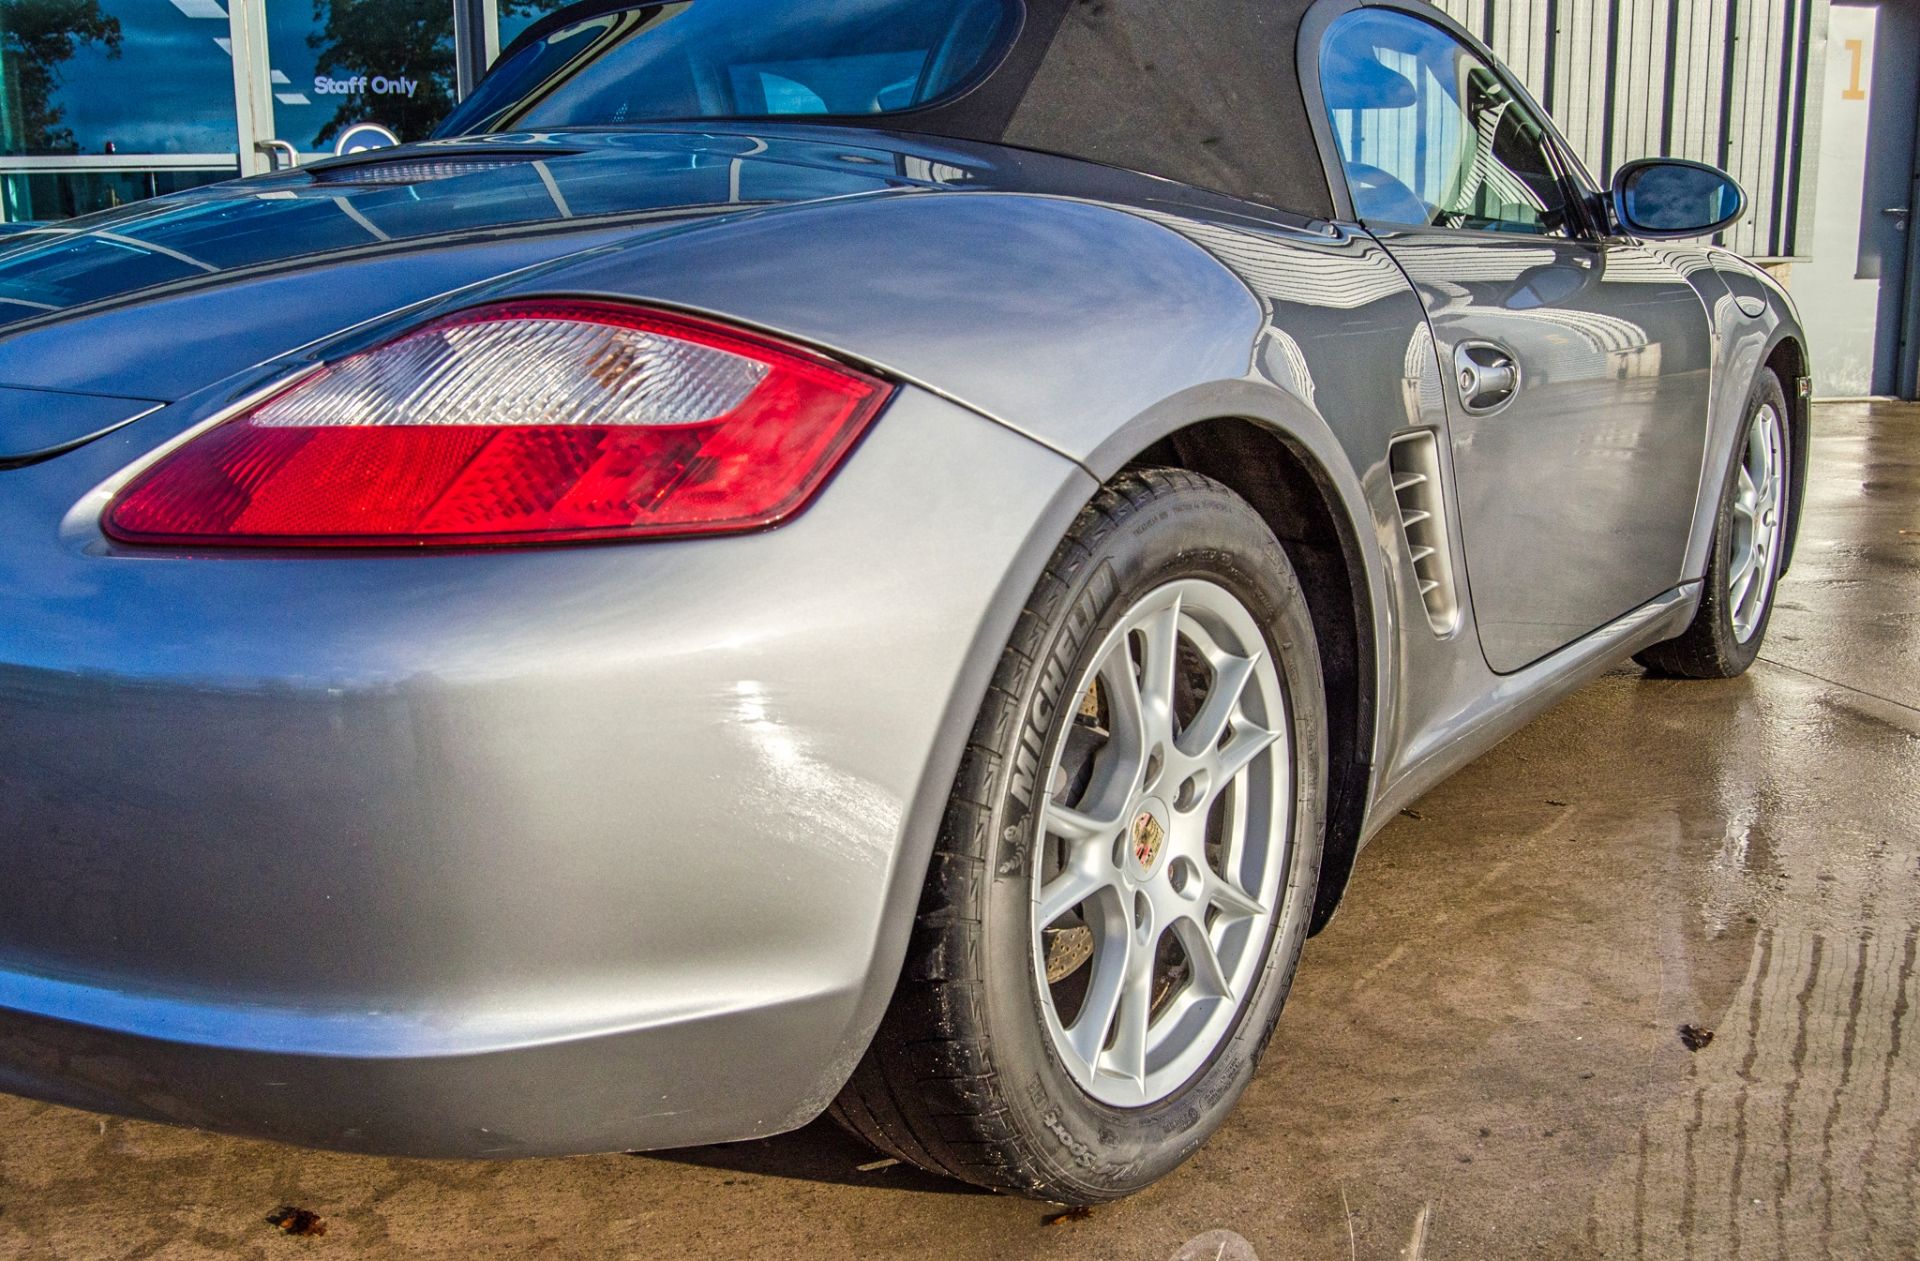 Porsche Boxster 2.7 litre 5 speed manual convertible roadster Registration Number: RN05 KFK Date - Image 14 of 45